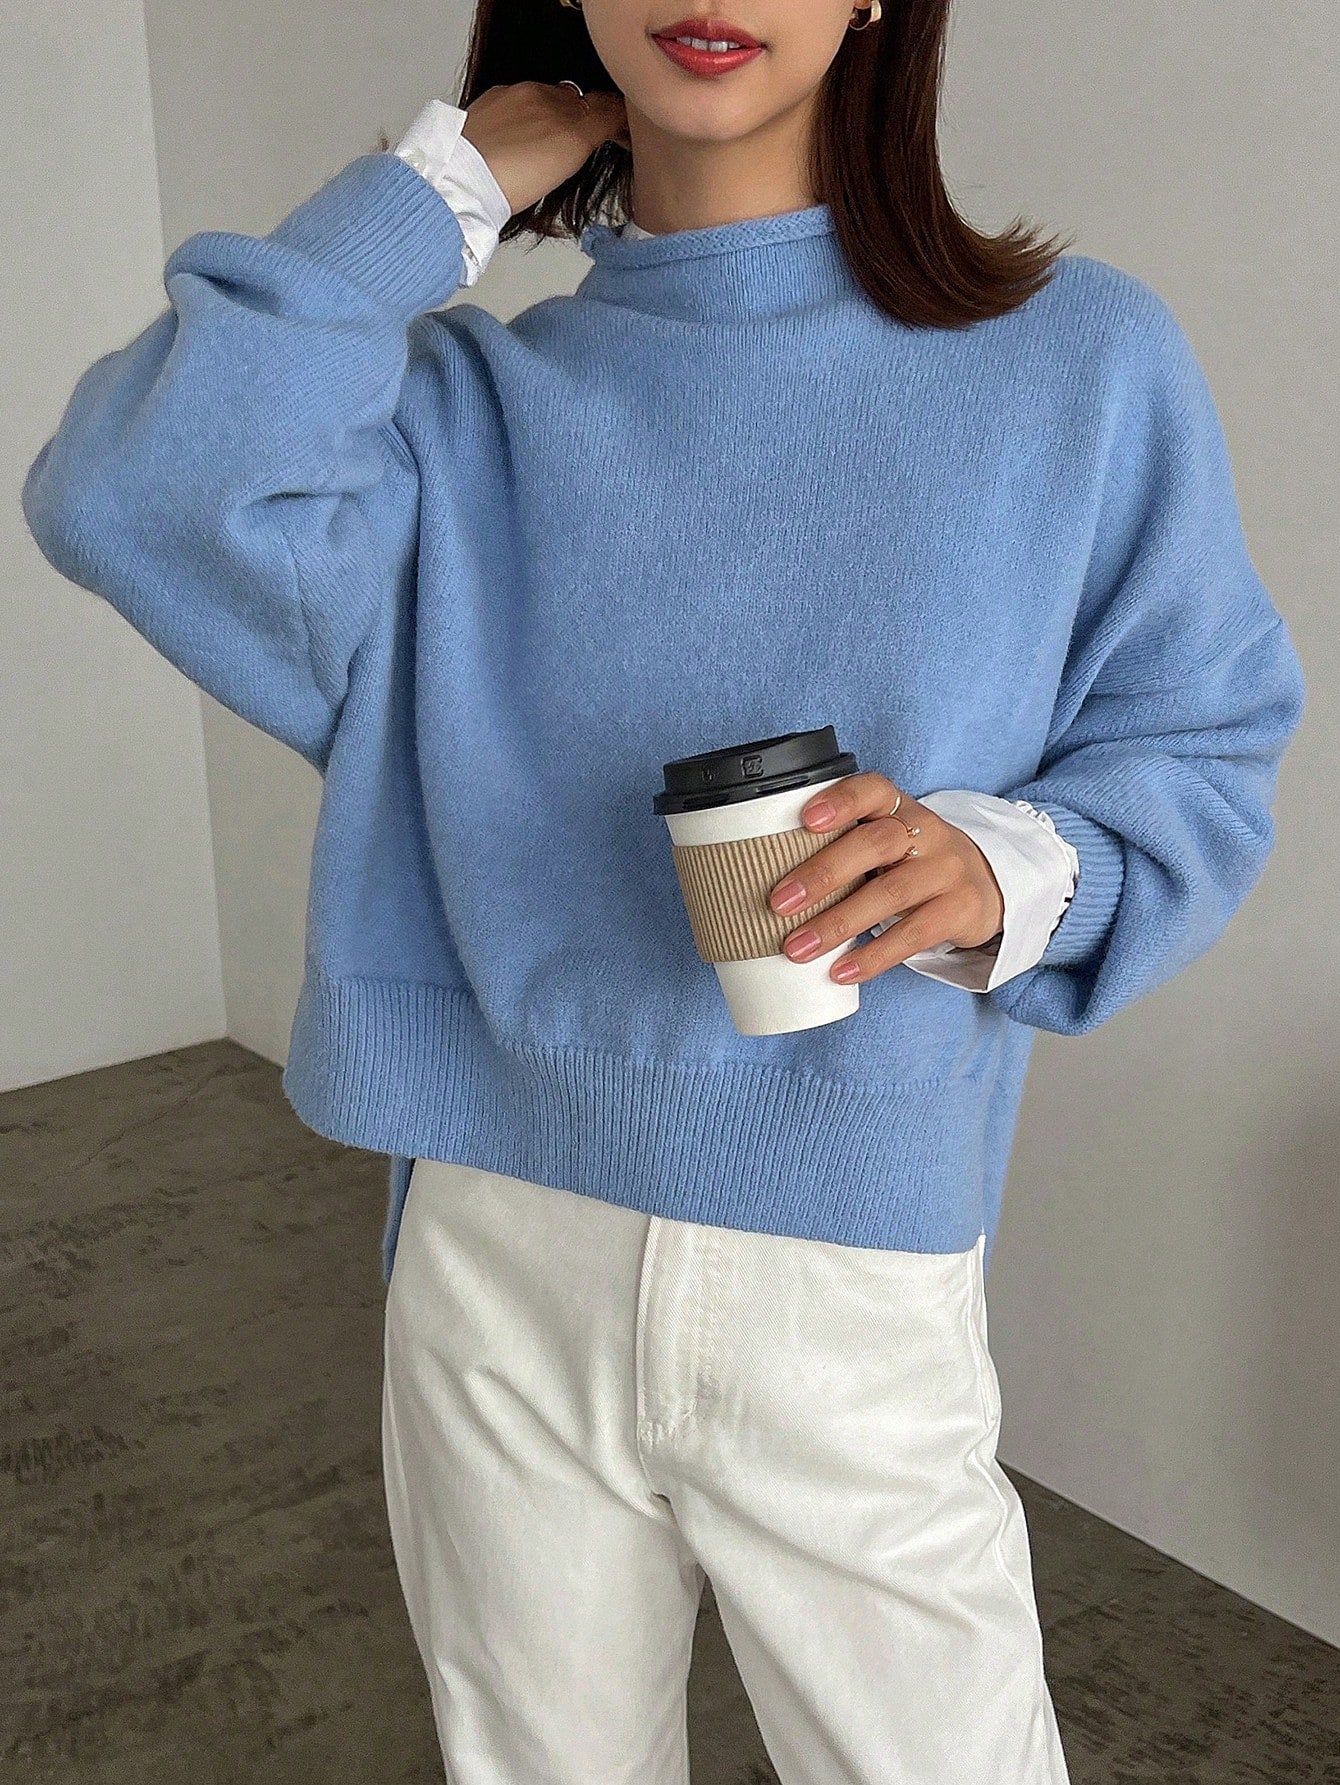 Women's Blue Casual Knit Sweater With Short Front And Long Back